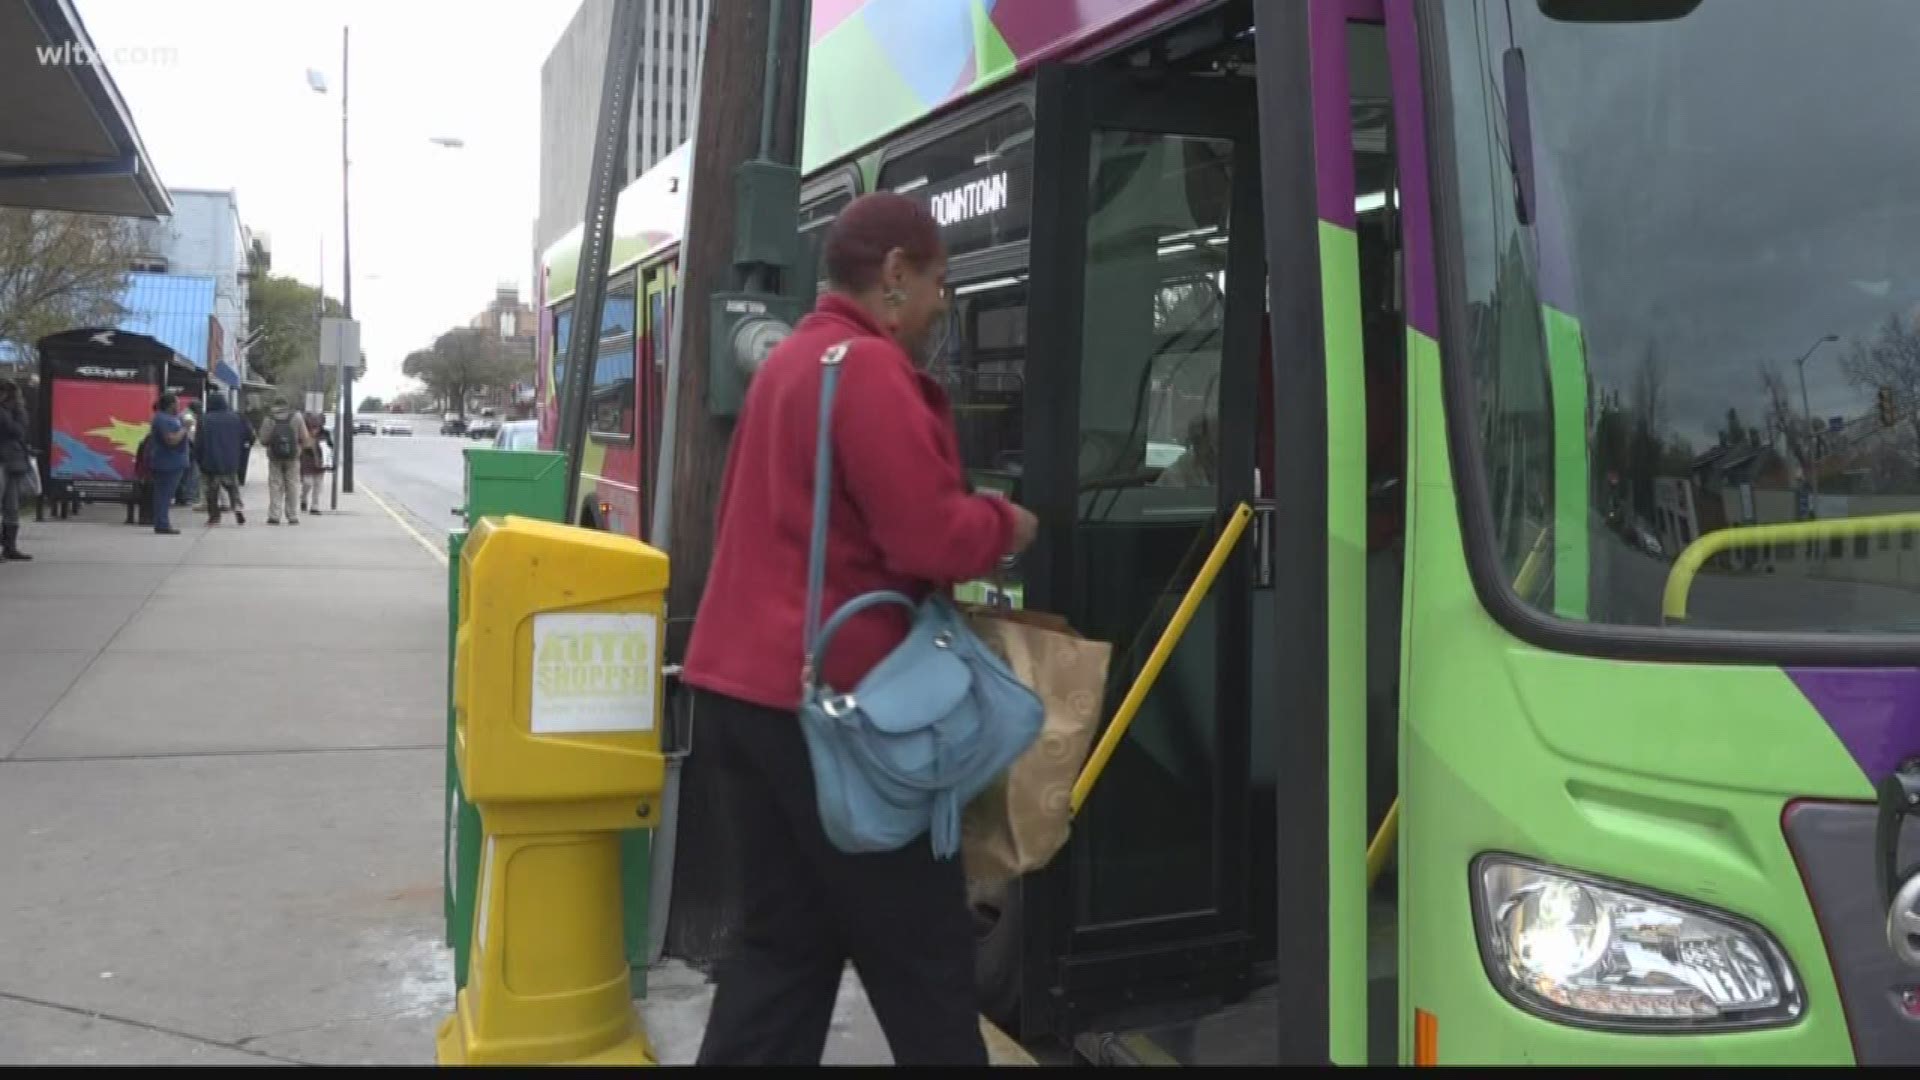 Midlands transit program COMET is offering free bus services to voters for Saturday's Democratic primary.